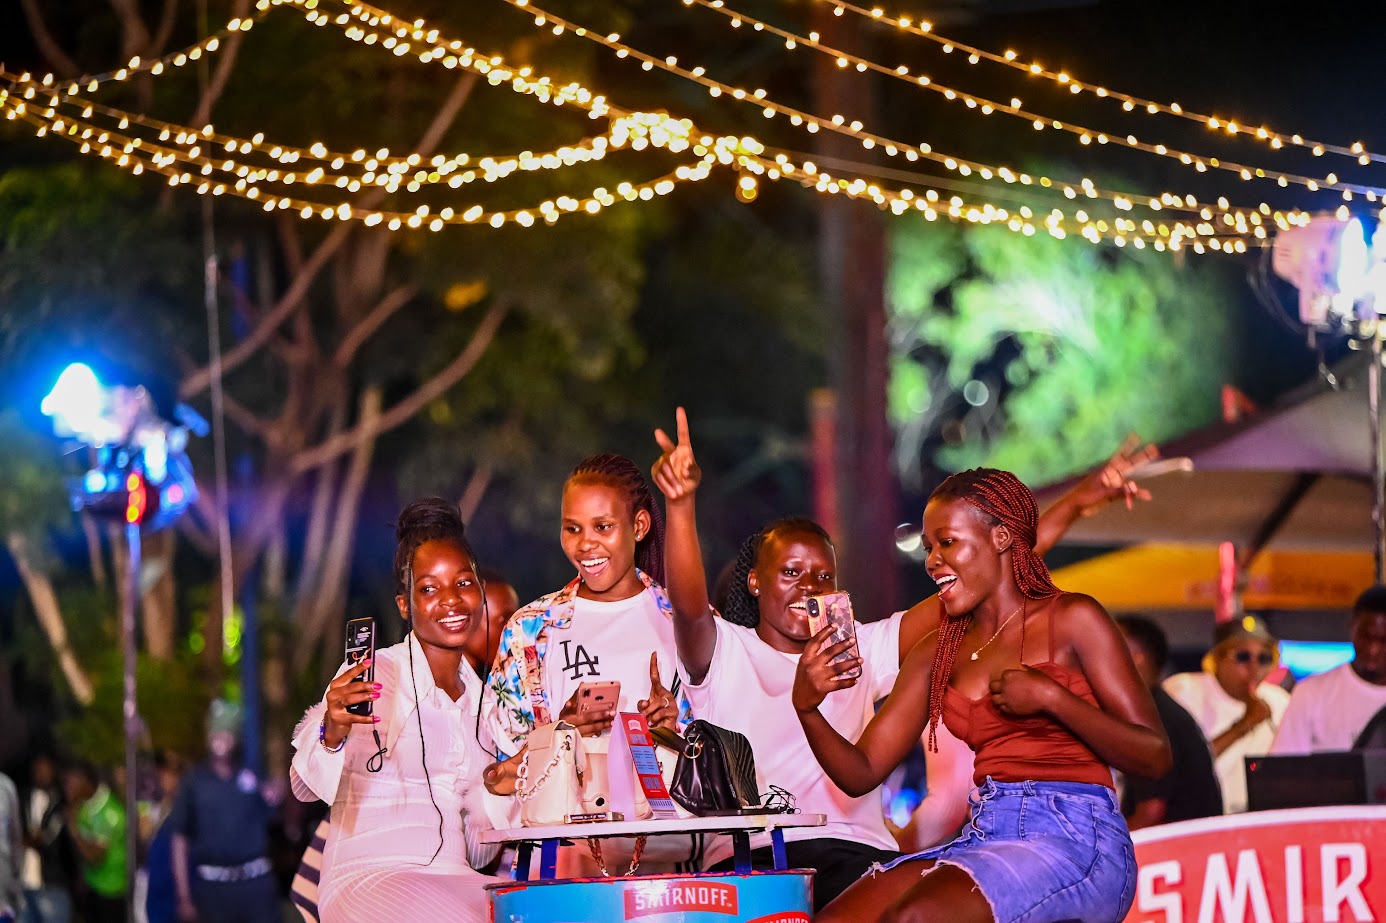 Smirnoff throws edgy freshers’ ball at International University of East Africa